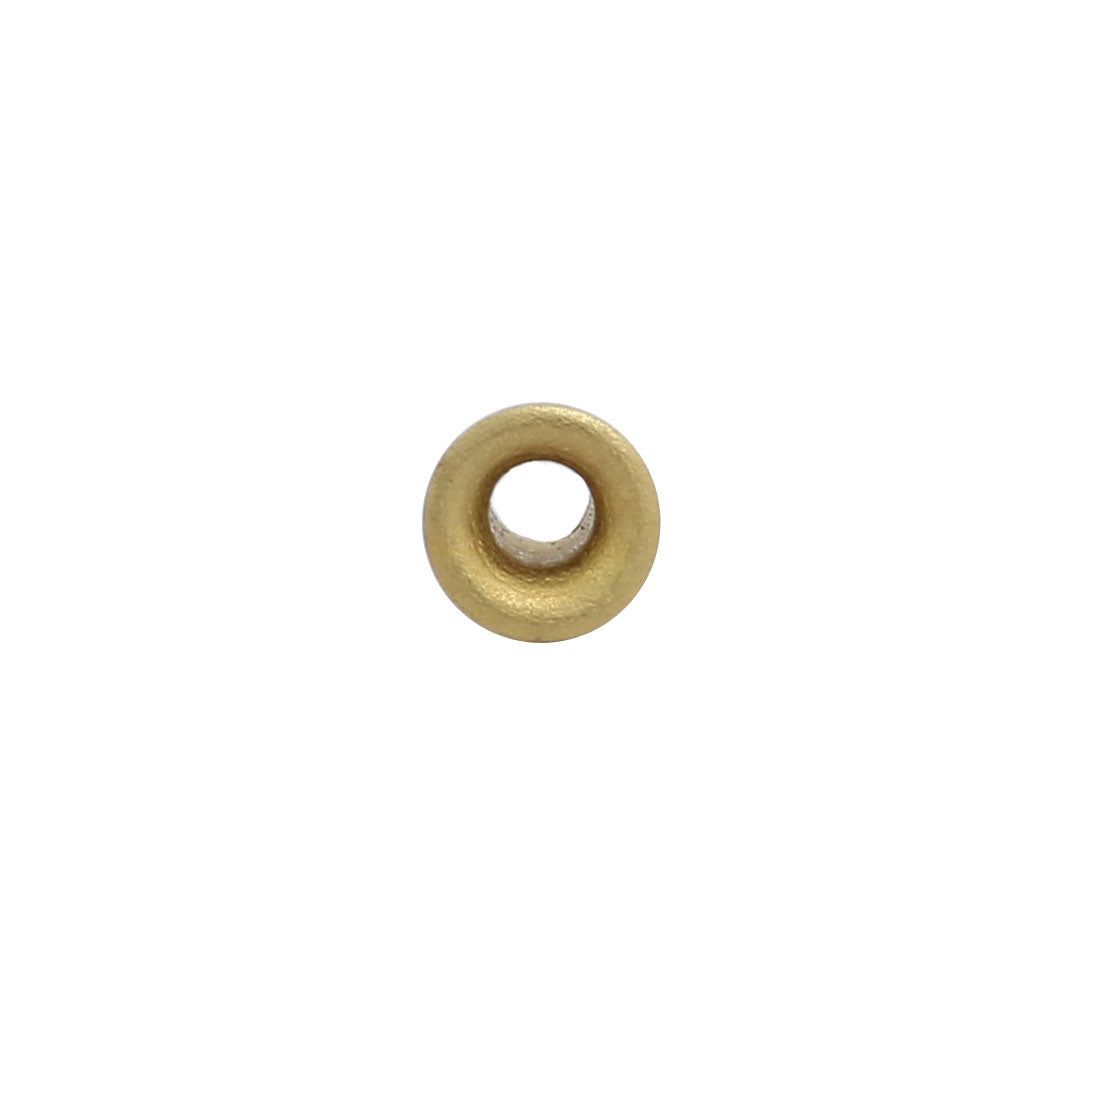 uxcell Uxcell 100pcs M2.5 x 4mm Brass Plated Metal Hollow Eyelets Rivets Gold Tone